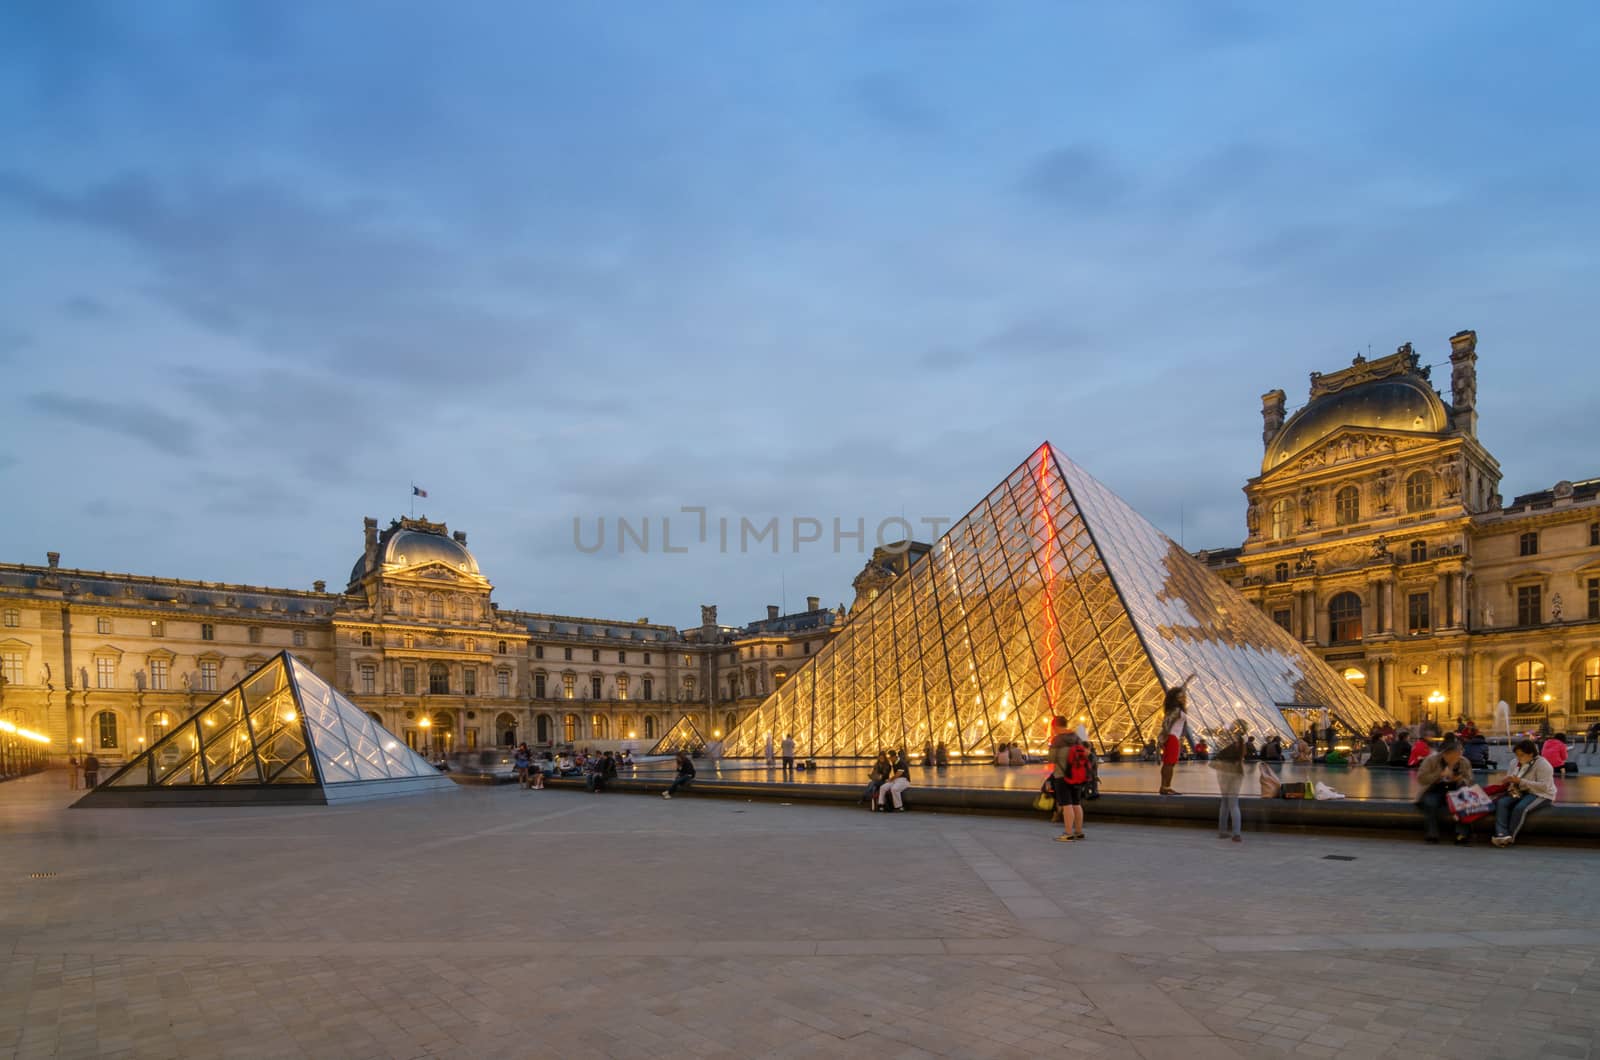 Paris, France - May 14, 2015: Tourists visiting Louvre museum at dusk on May 14, 2015 in Paris. This is one of the most popular tourist destinations in France.